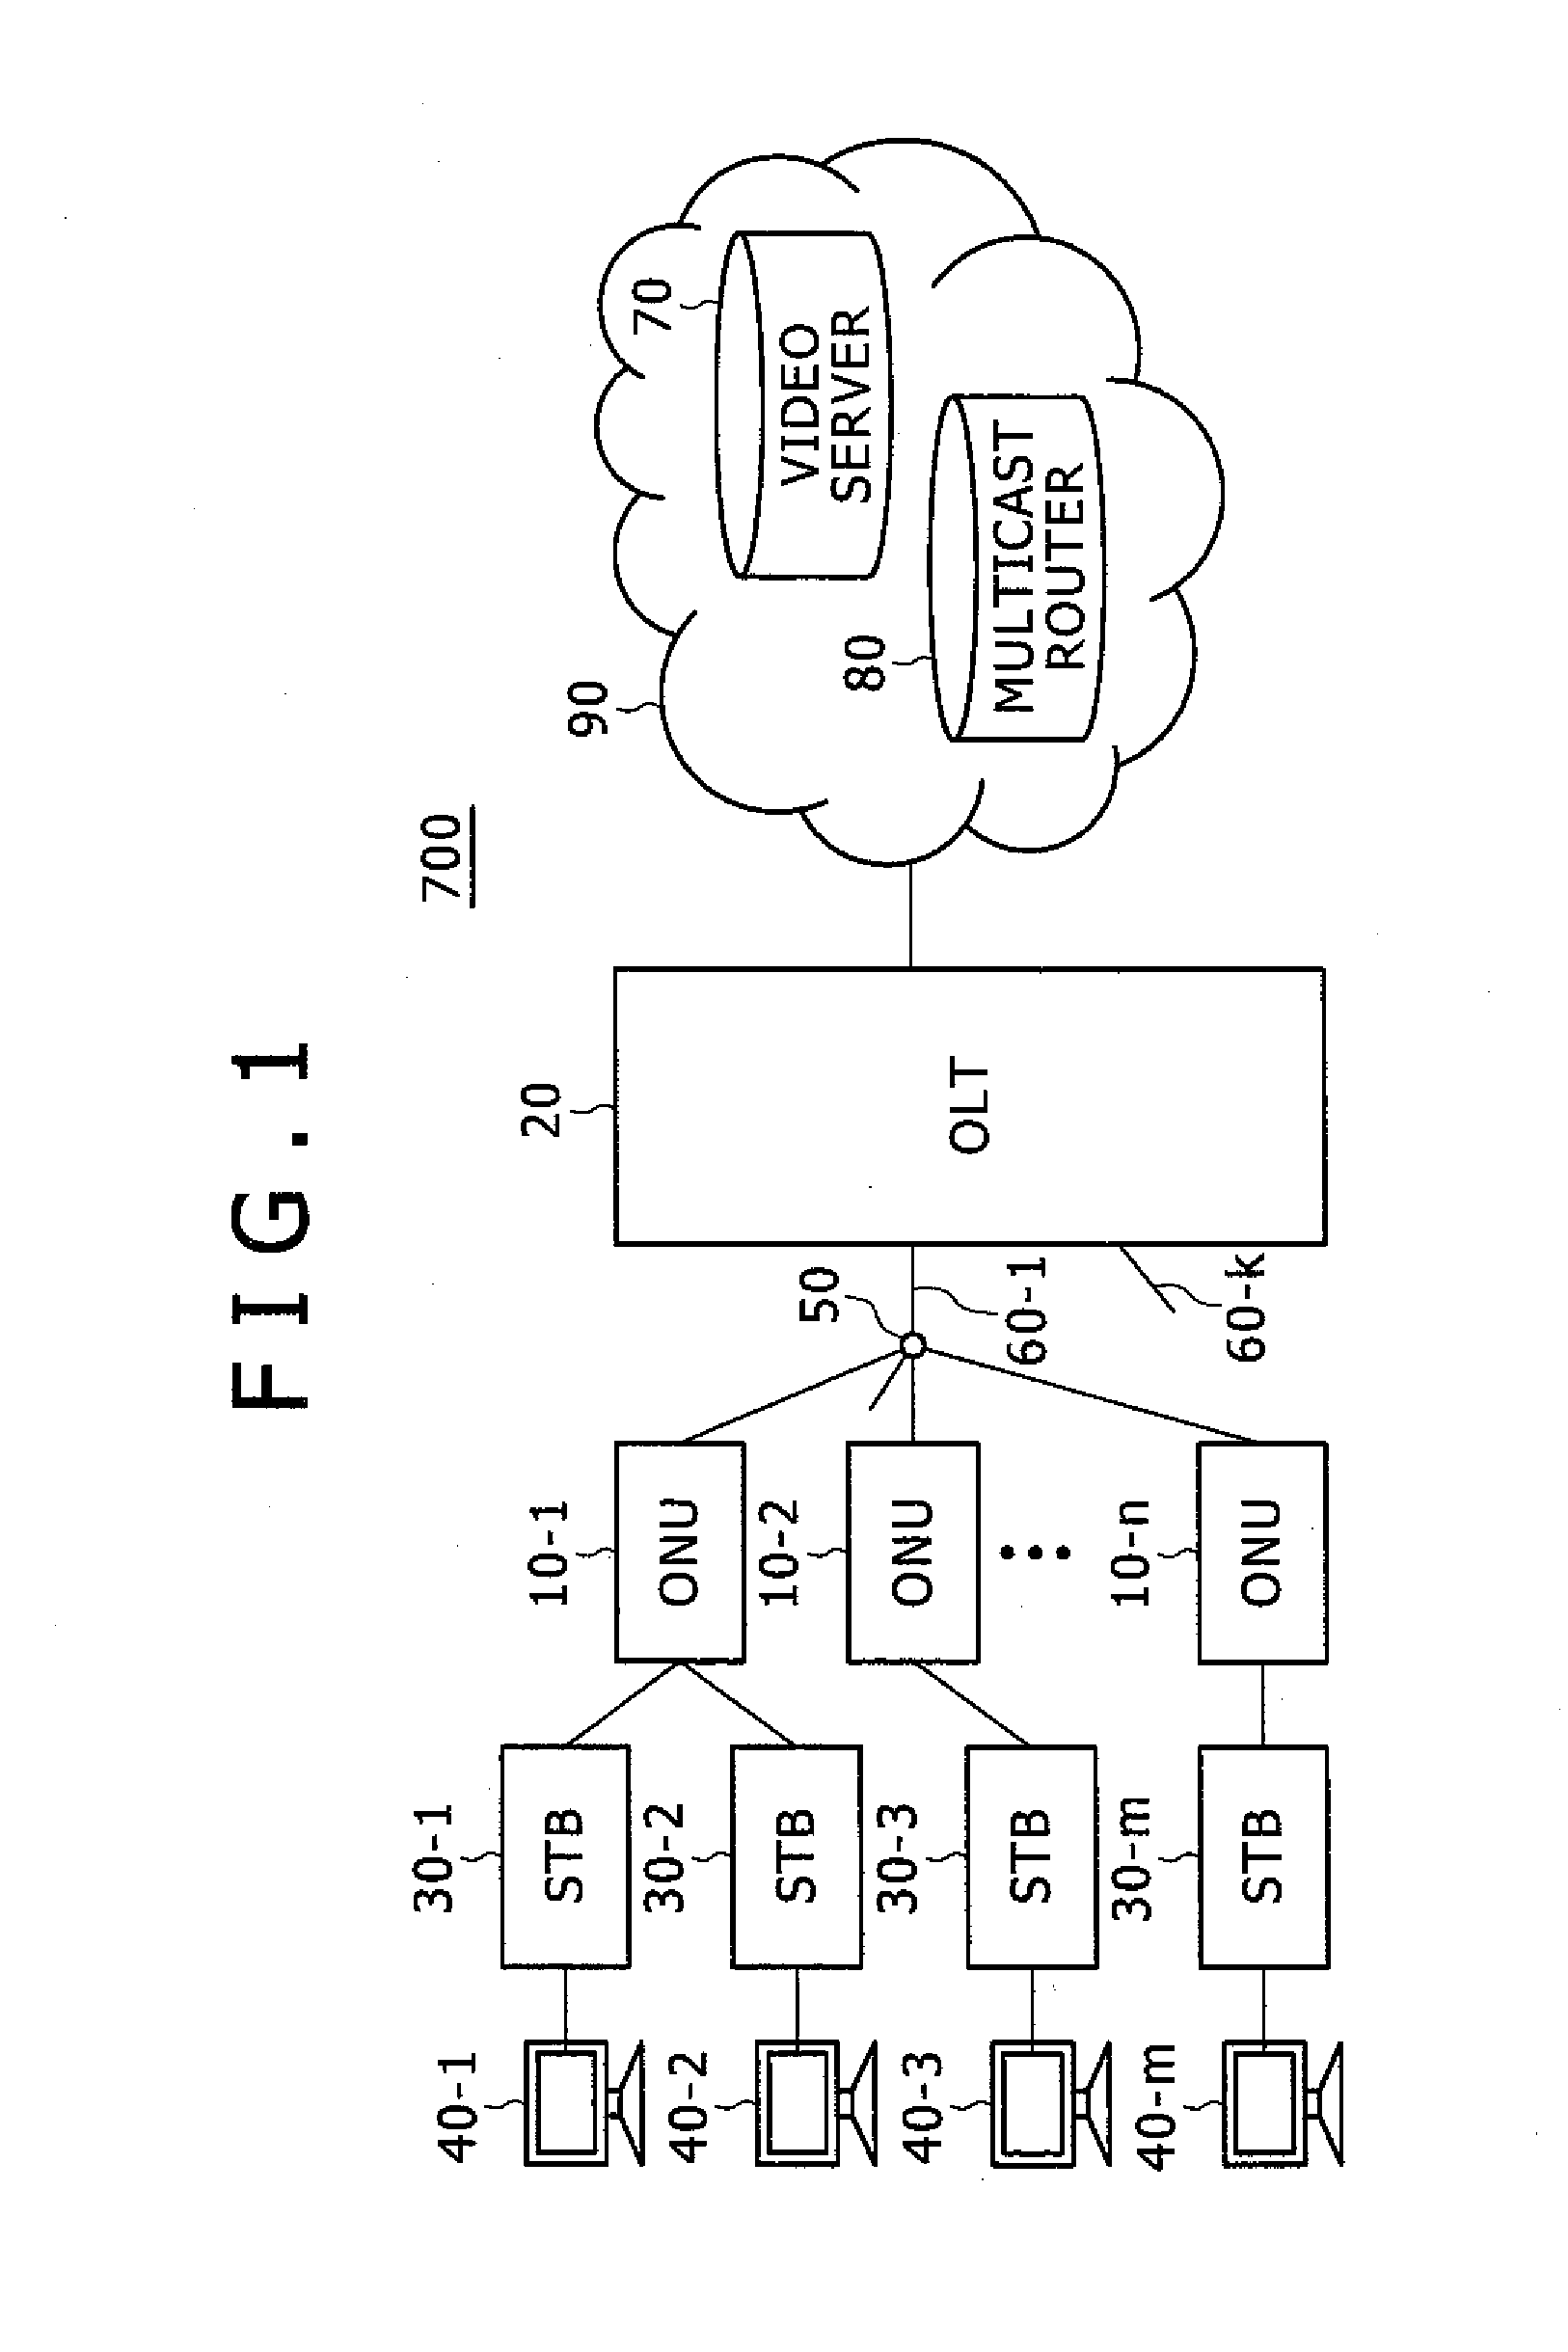 Optical network system and method of changing encryption keys